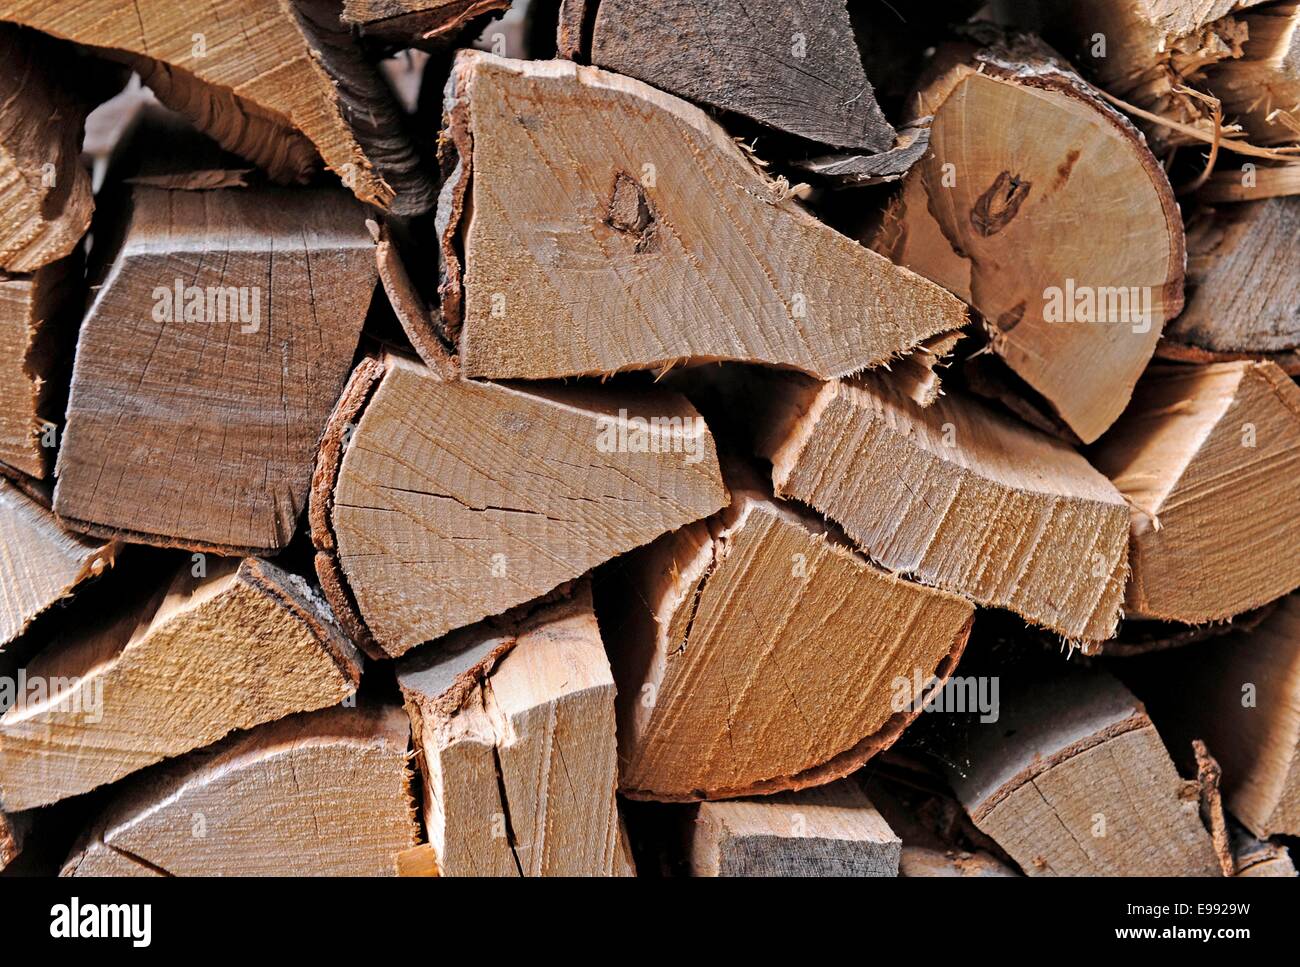 Stapled woodbillets,Tuebingen, southern Germany, on  Oct. 22, 2009. , southern Germany,. Stock Photo